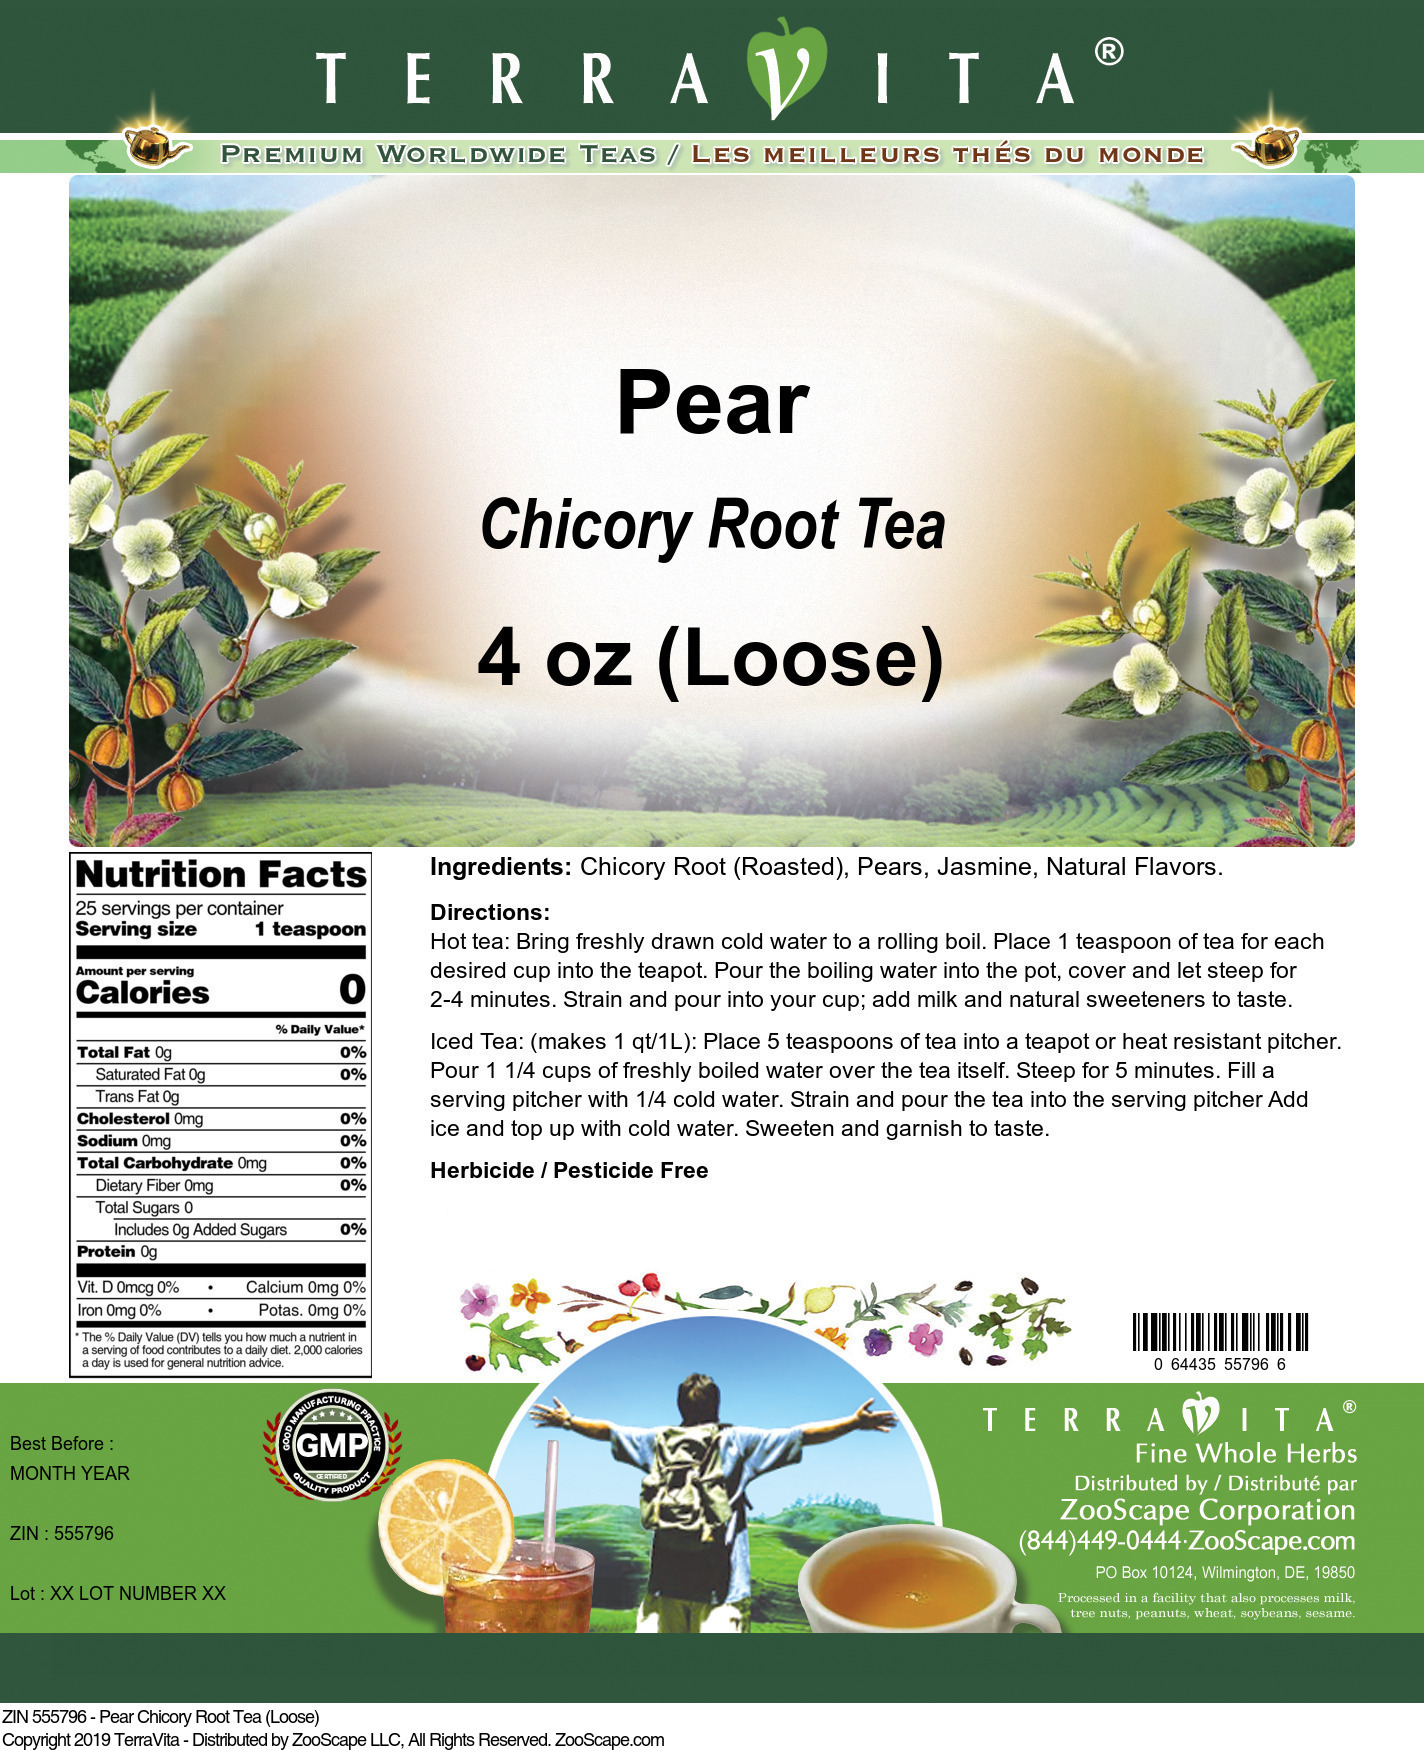 Pear Chicory Root Tea (Loose) - Label